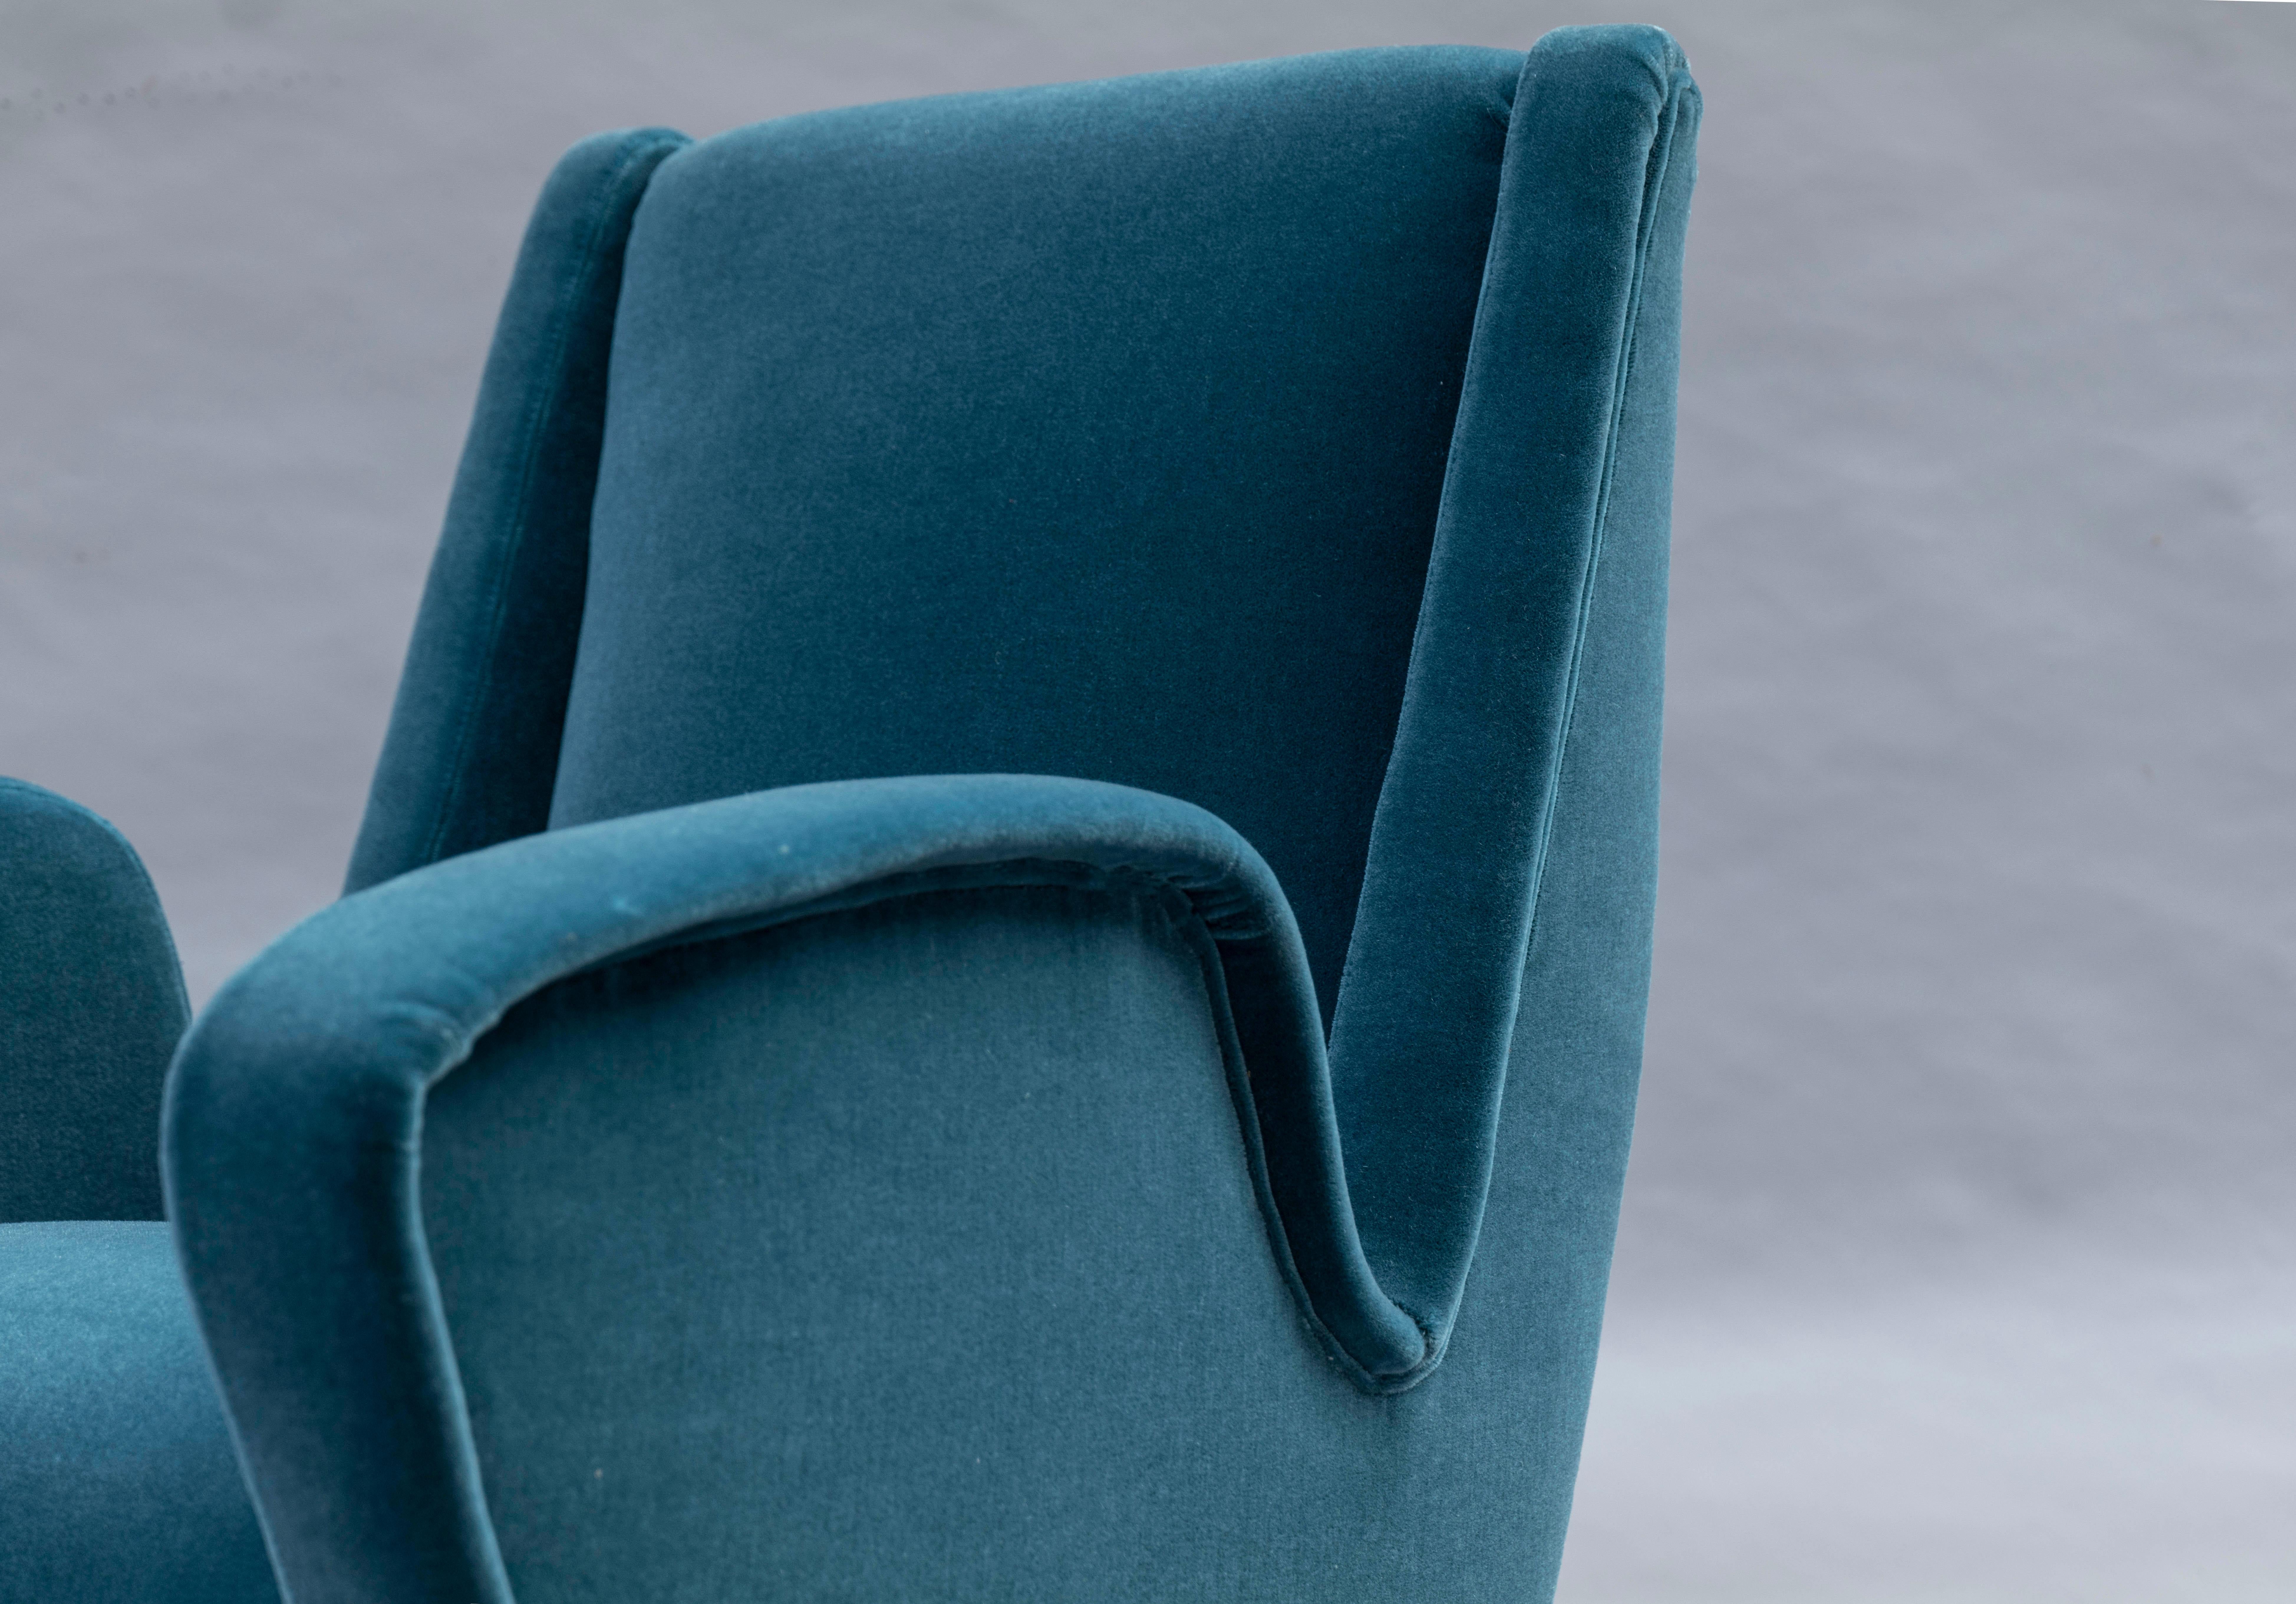 Italian Armchair Attributed To Gio' Ponti, Italy 1950s, In Pierre Frey Mohair